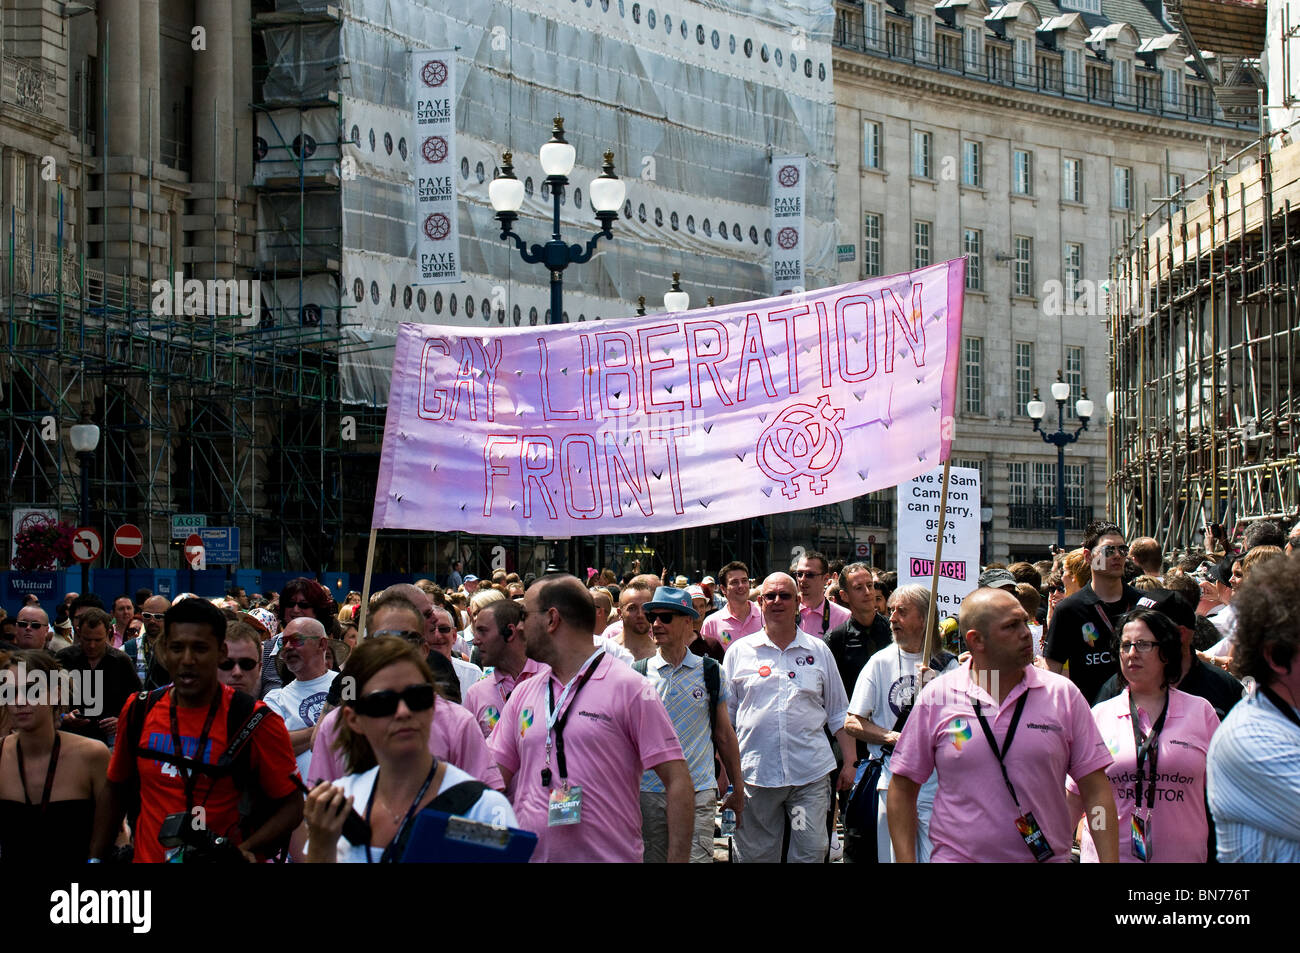 A Gay Liberation Front banner at the Pride London celebration in London. Stock Photo